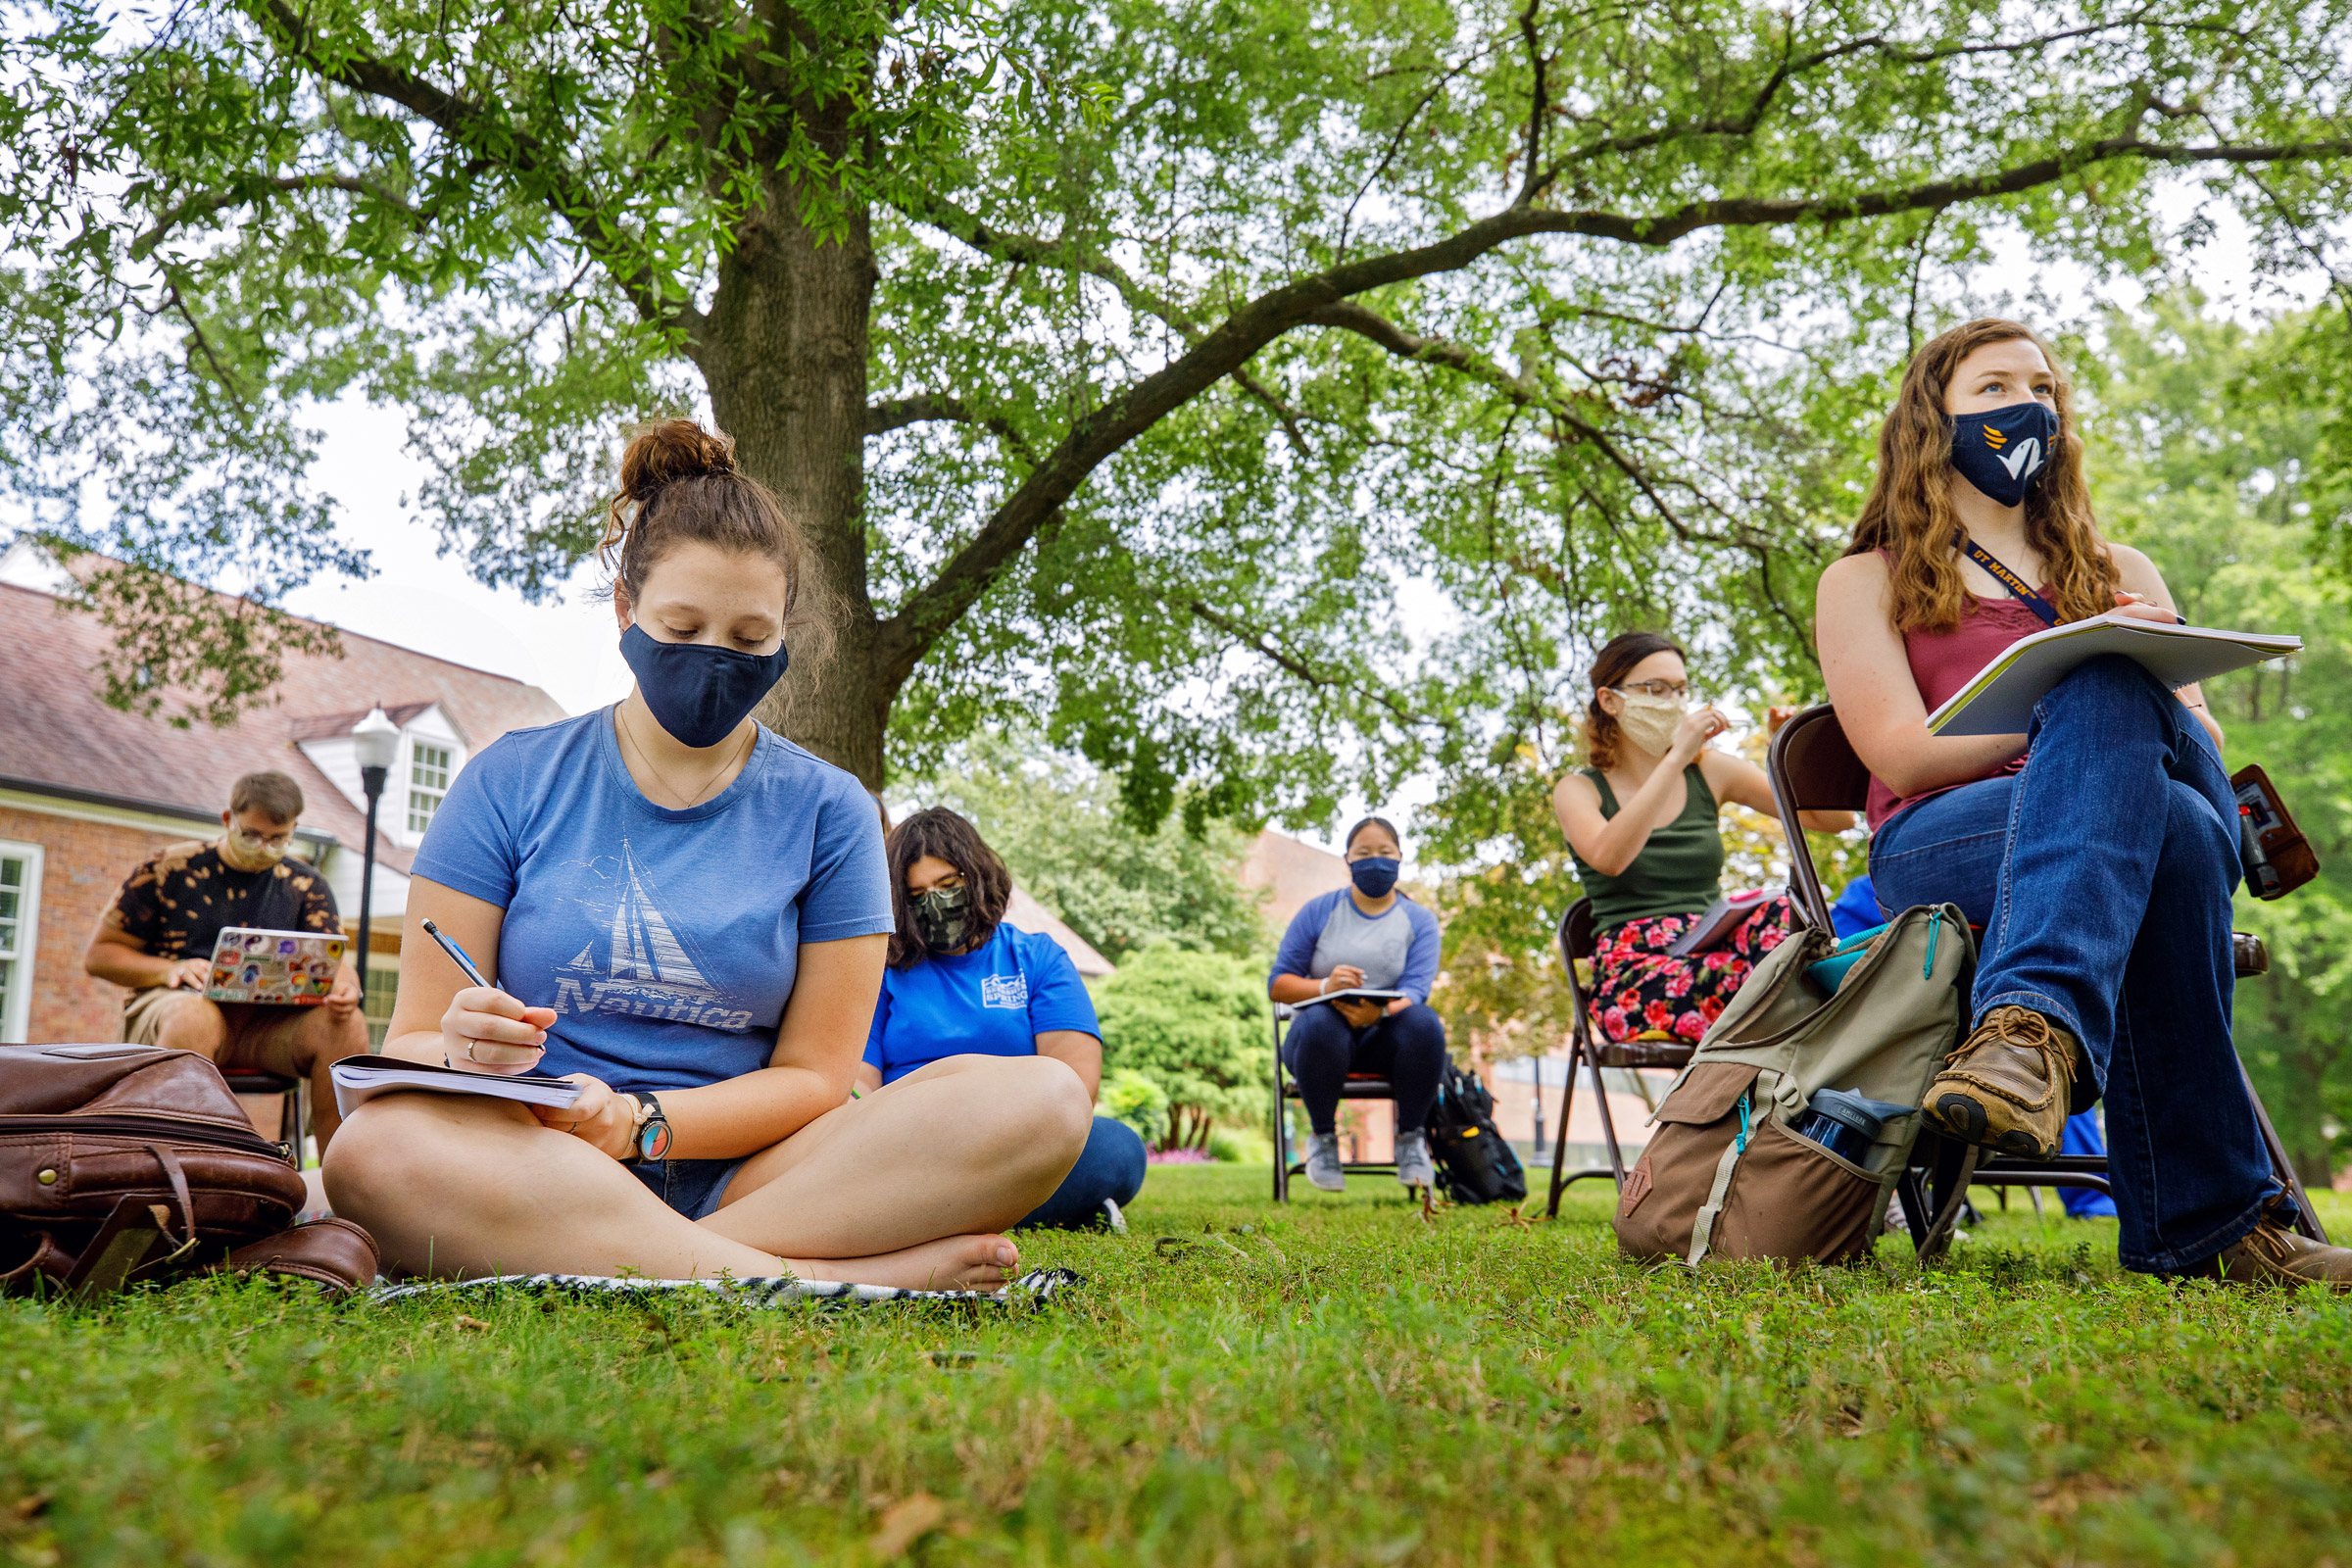 A group of students take notes in the shade outdoors, spaced apart by 6 feet